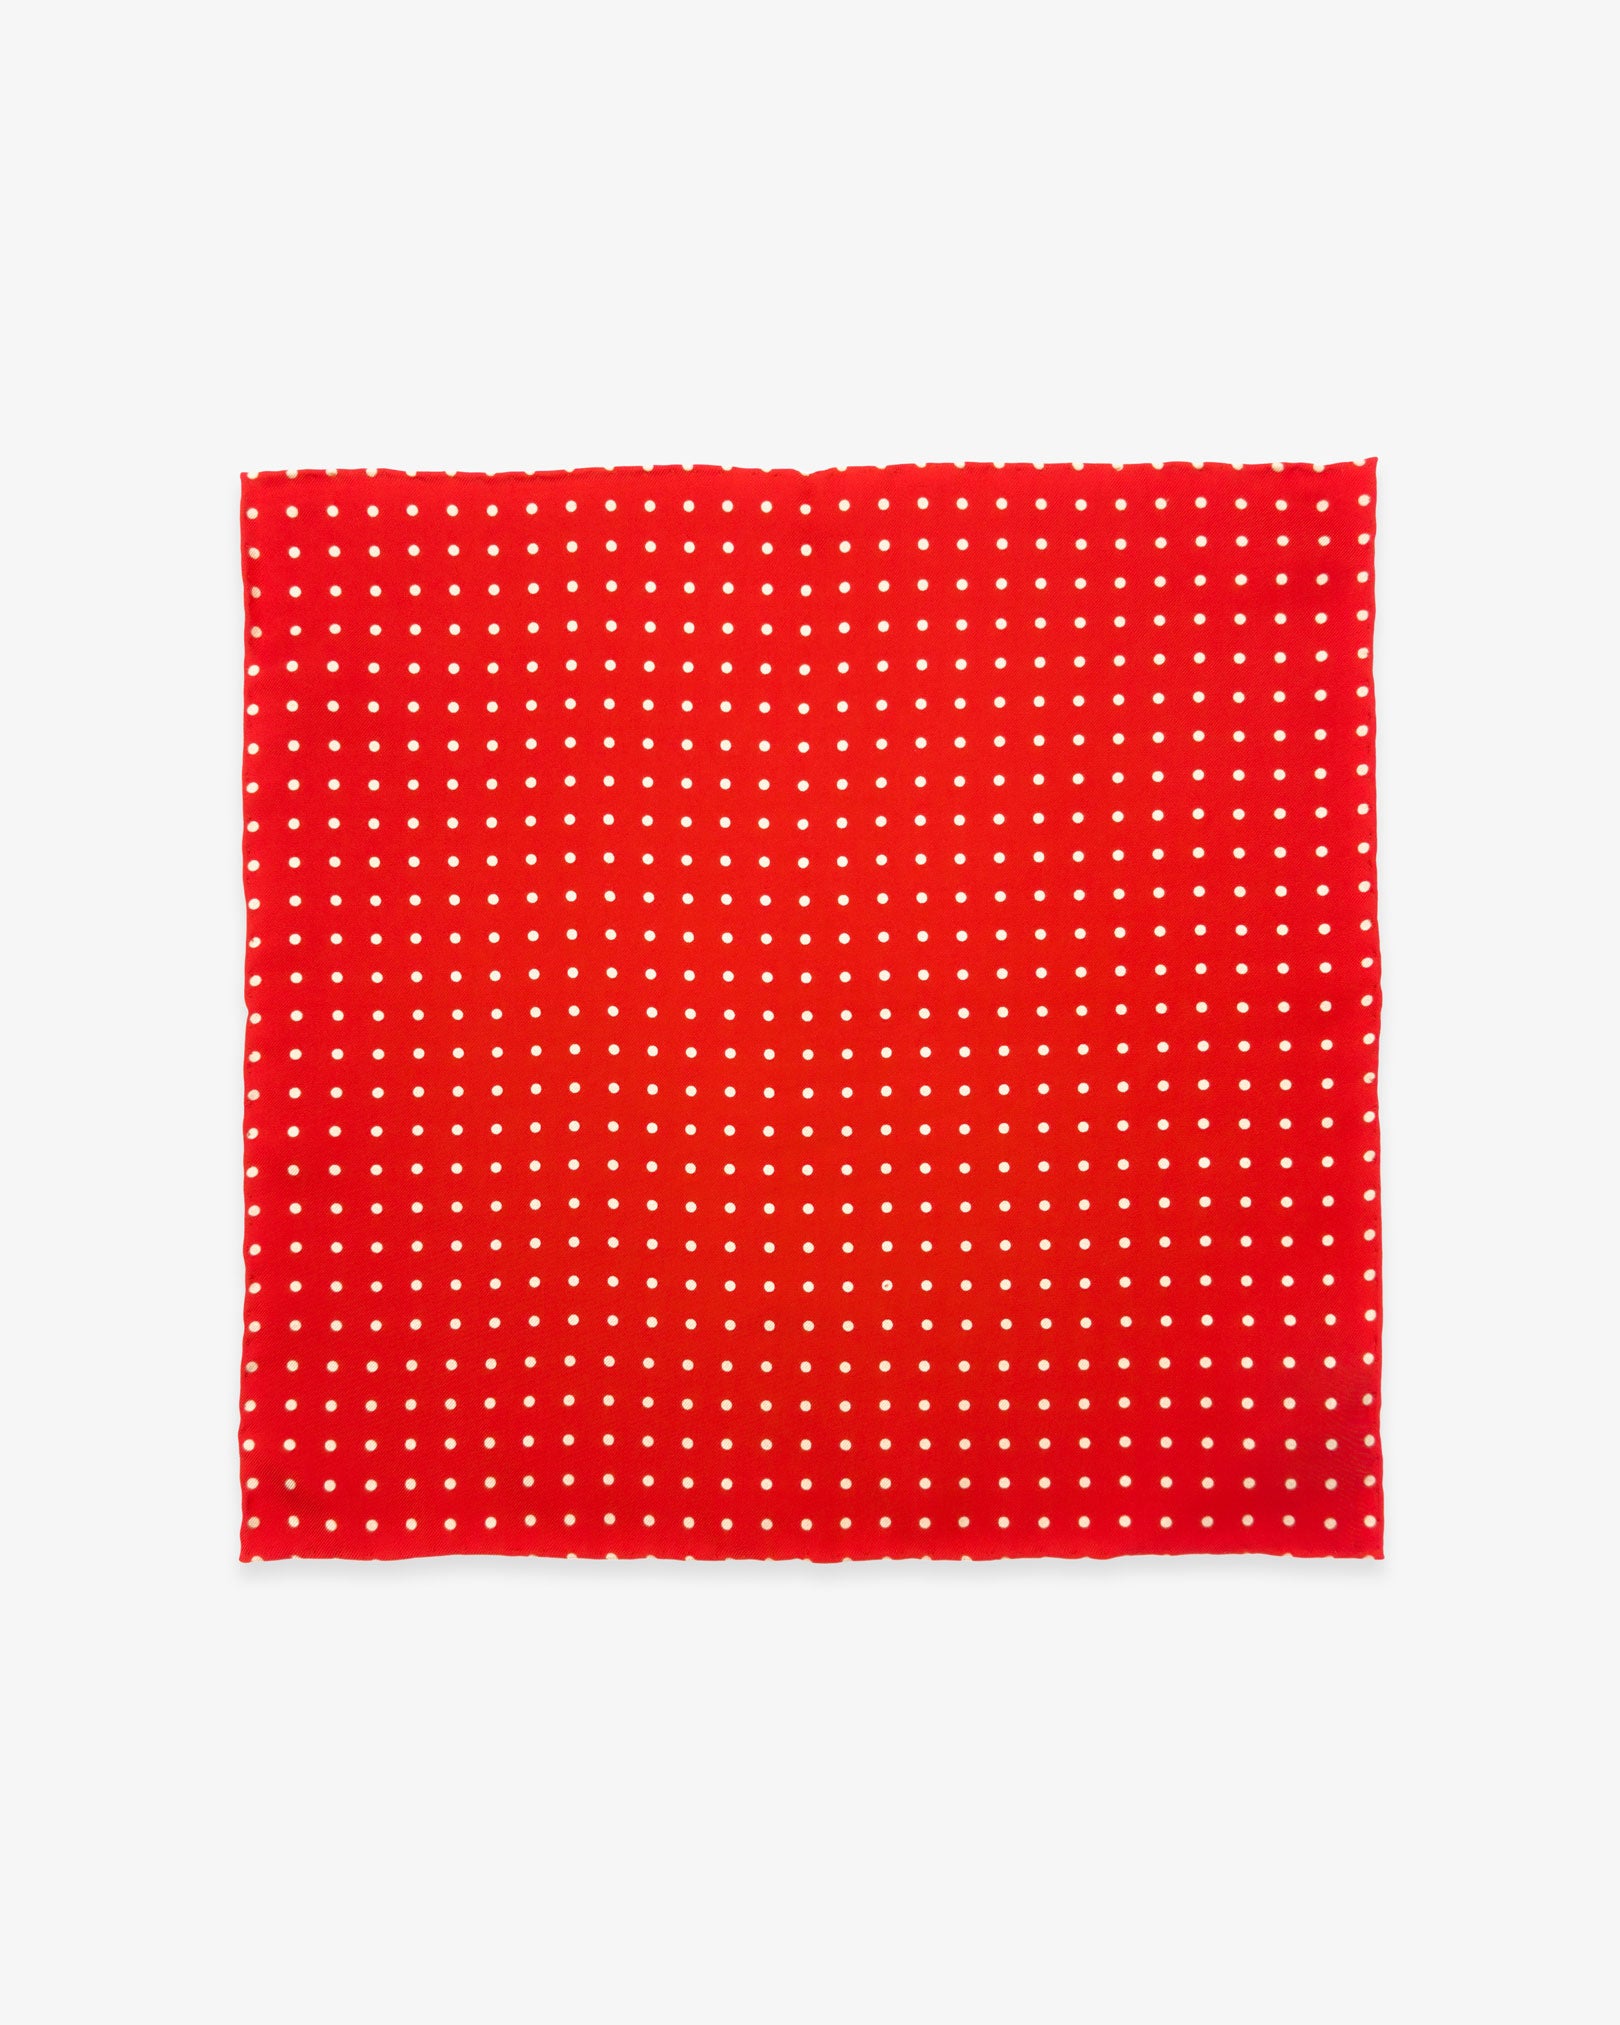 Fully unfolded 'Hastings' English silk pocket square, showing the classic linear spotty decoration against a vibrant red background.